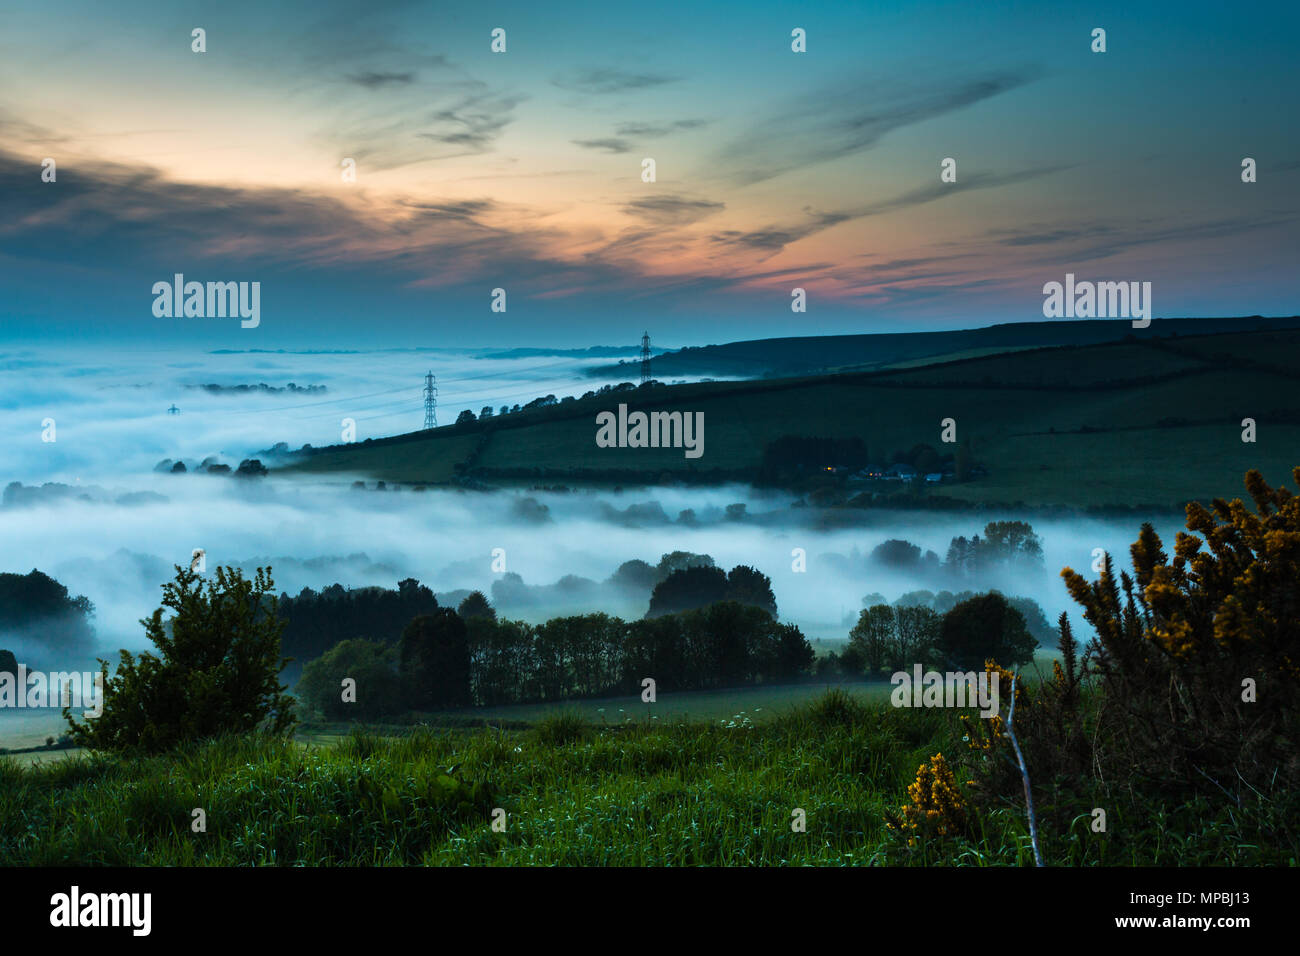 Dense, heavy, rolling, low lying evening cloud, fog or mist over Askerswell village, Dorset in English countryside at sunset viewed from hill by A35. Stock Photo